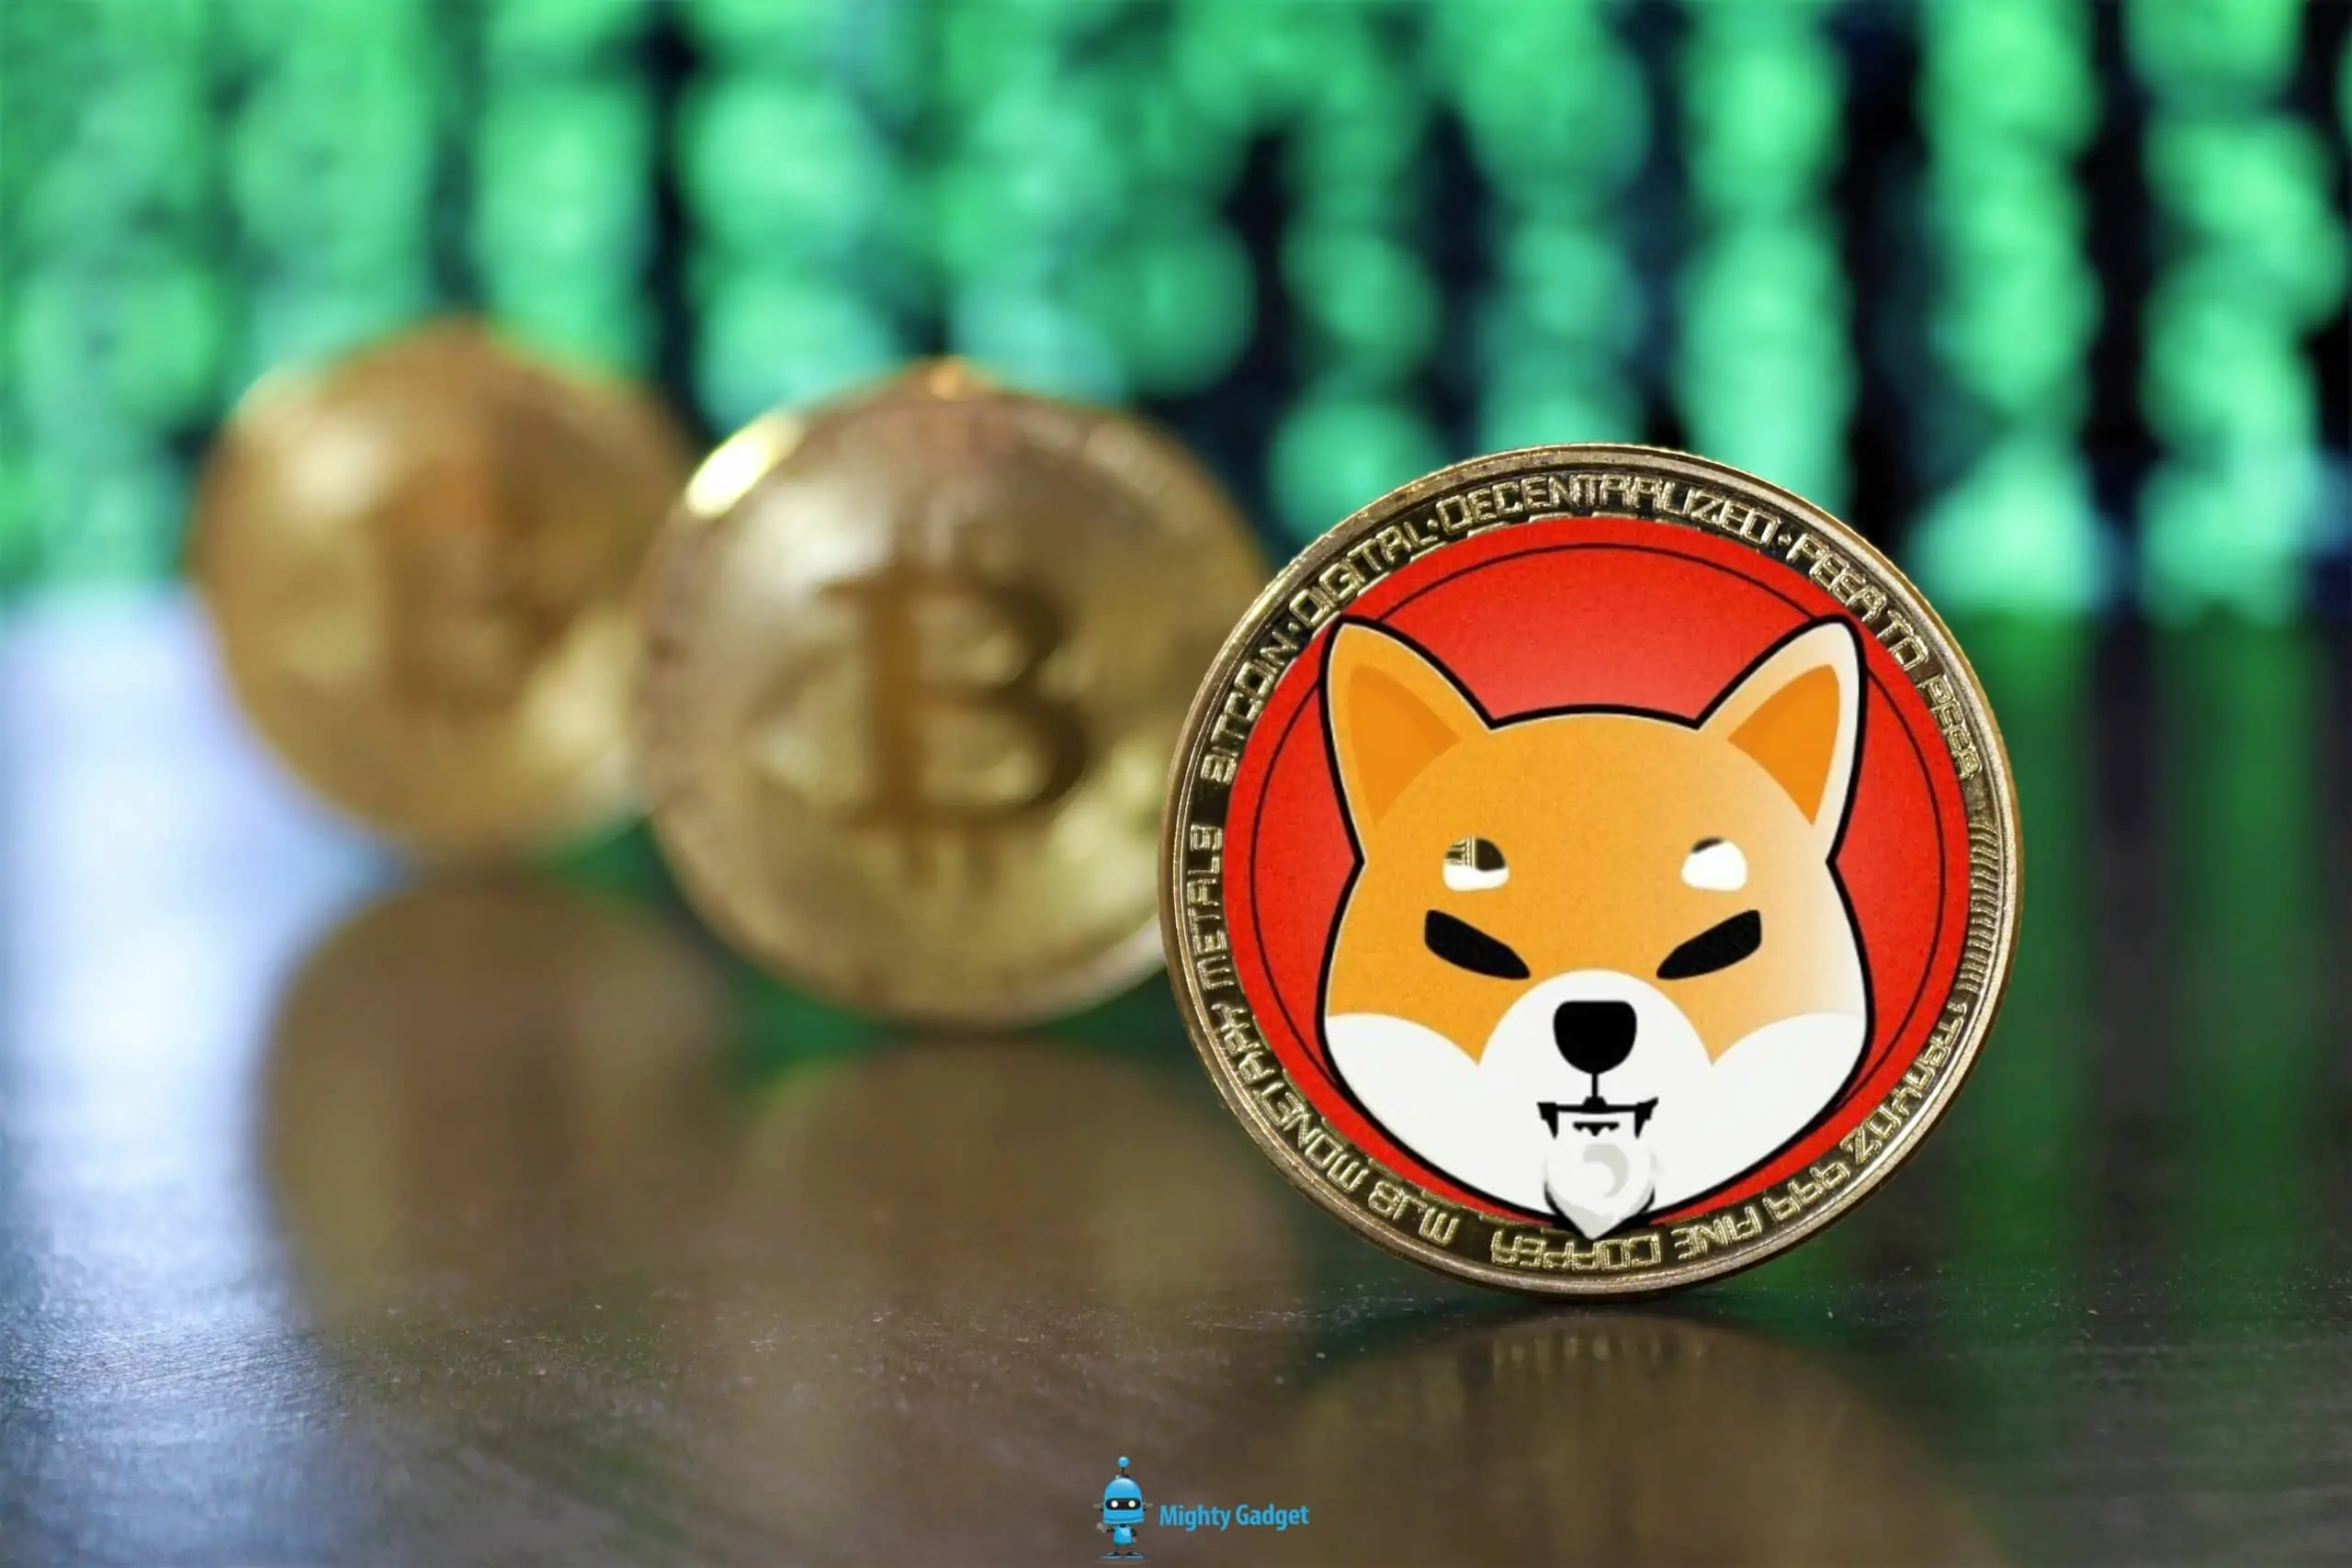 Shibaswap Goes Live – How to buy BONE token and provide liquidity for greater cryptocurrency returns